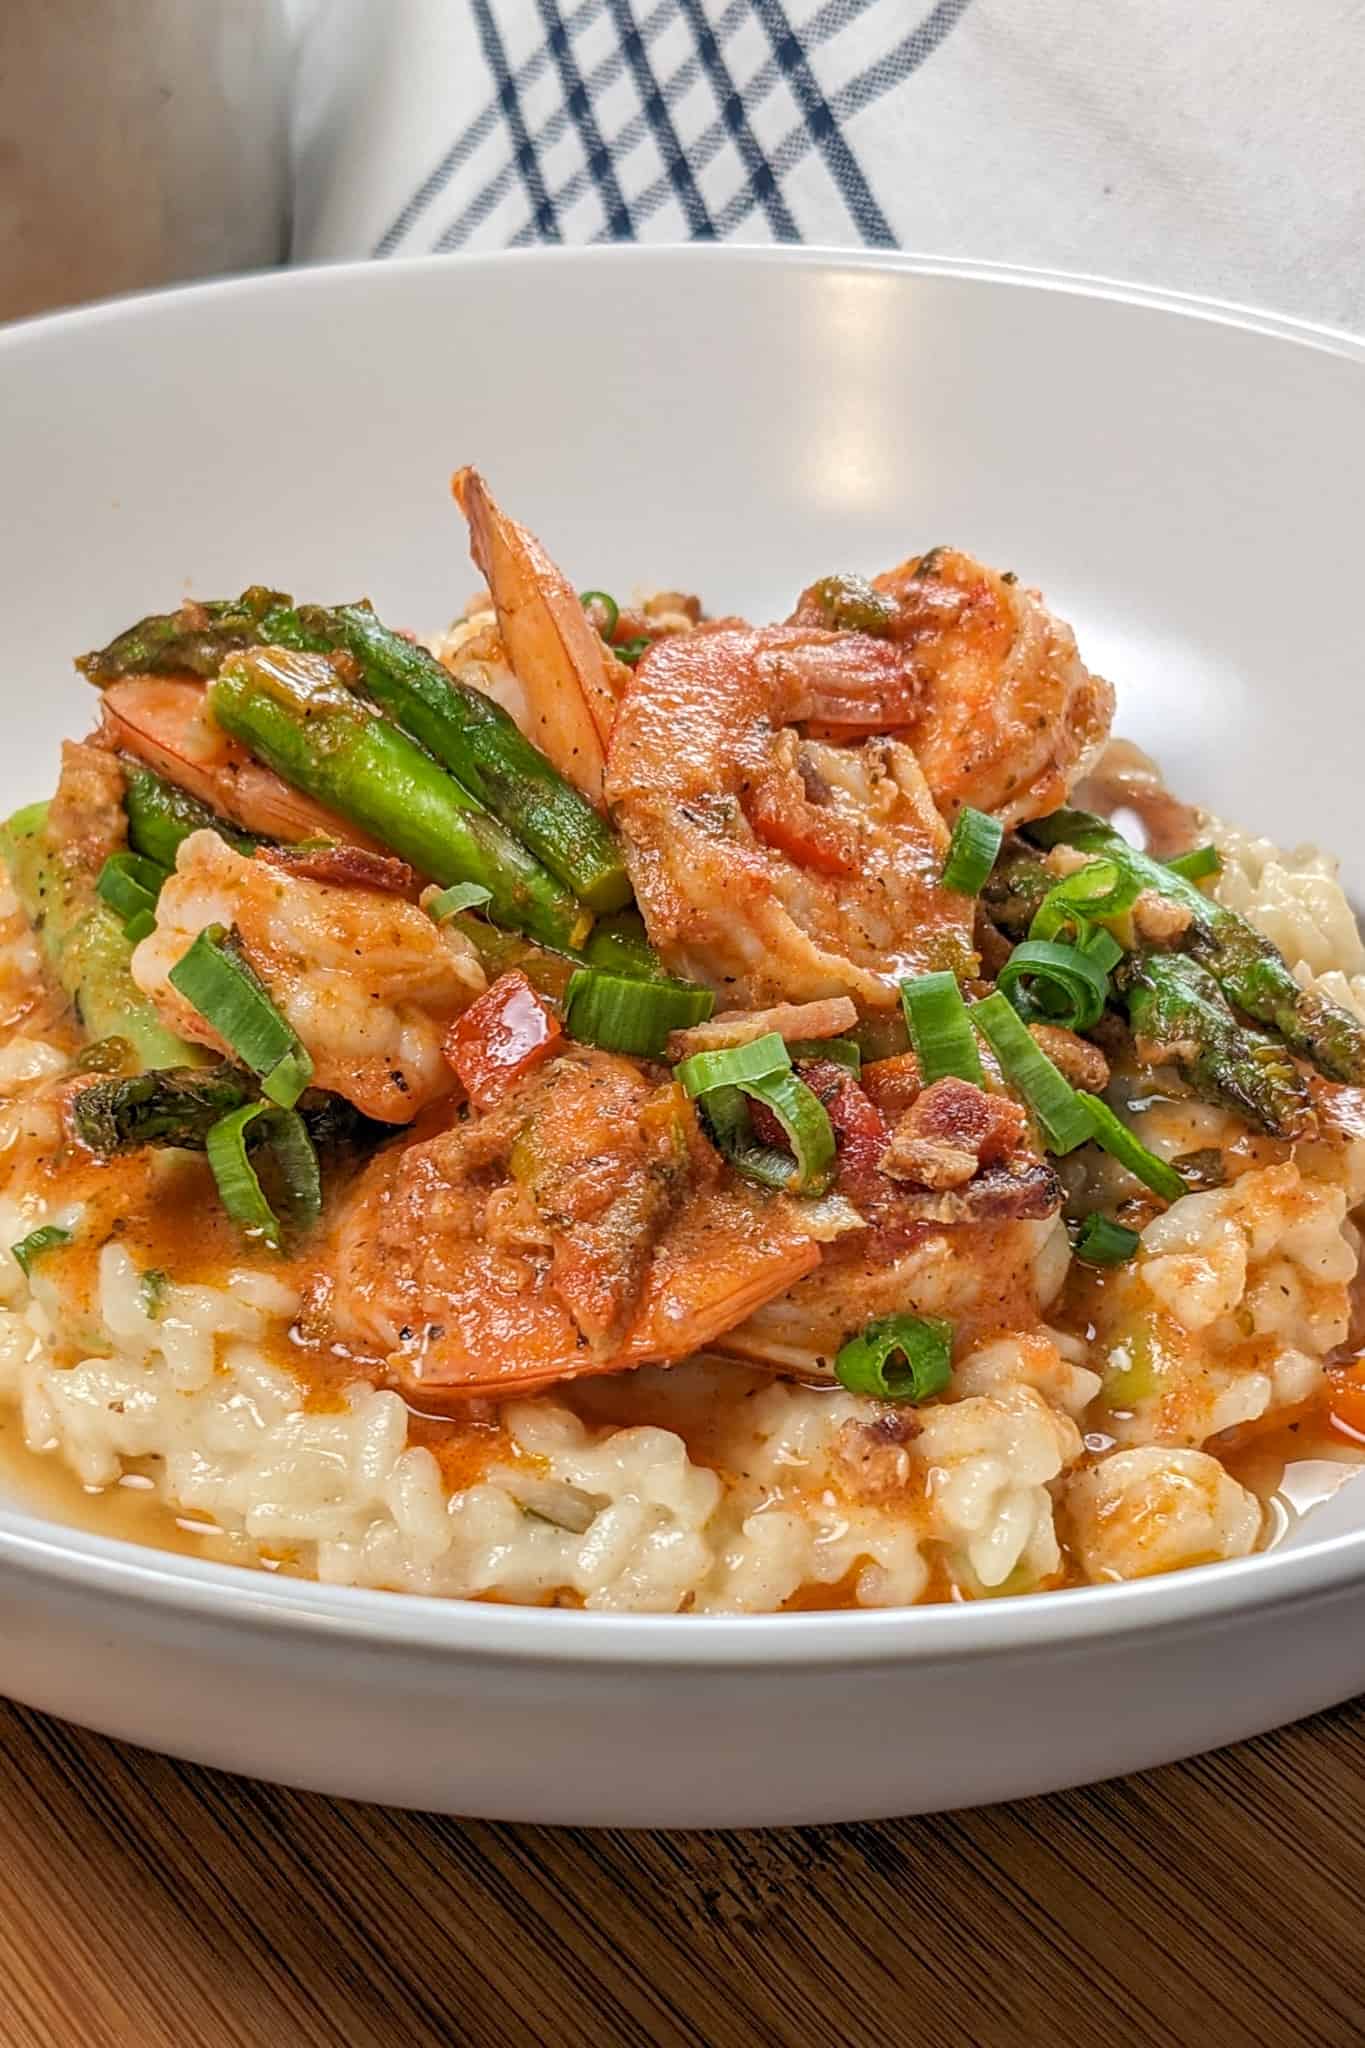 Side view of the Spicy Creole Shrimp and White Cheddar Cheese Risotto in a wide rim bowl.